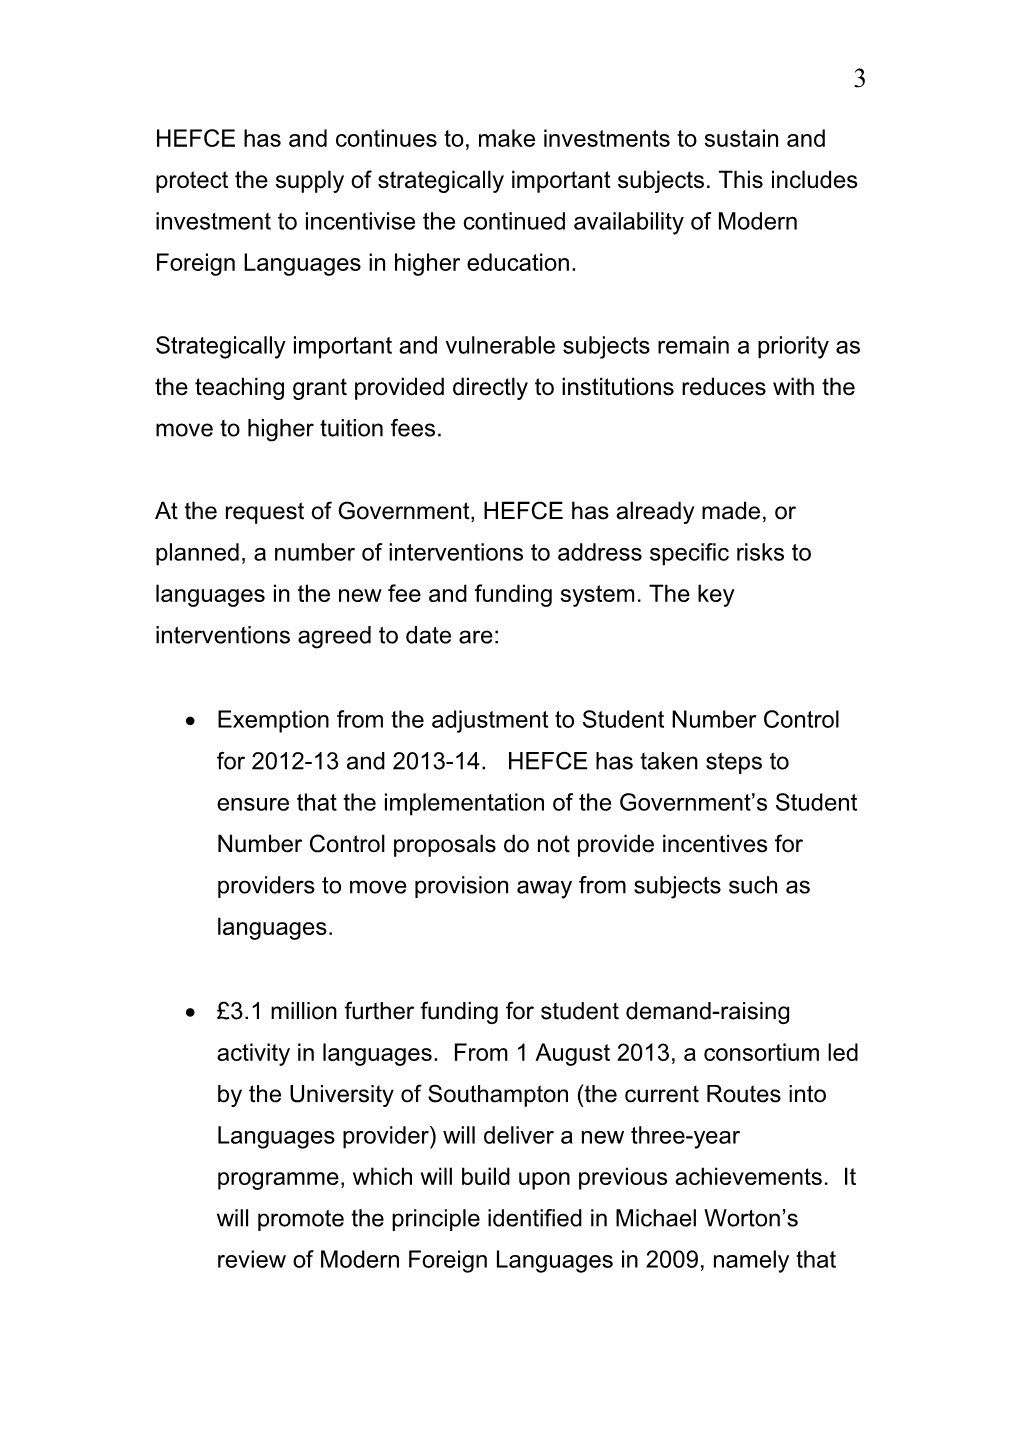 Draft Speaking Note for Baroness Garden British Academy Launch of Rethinking Language Policy